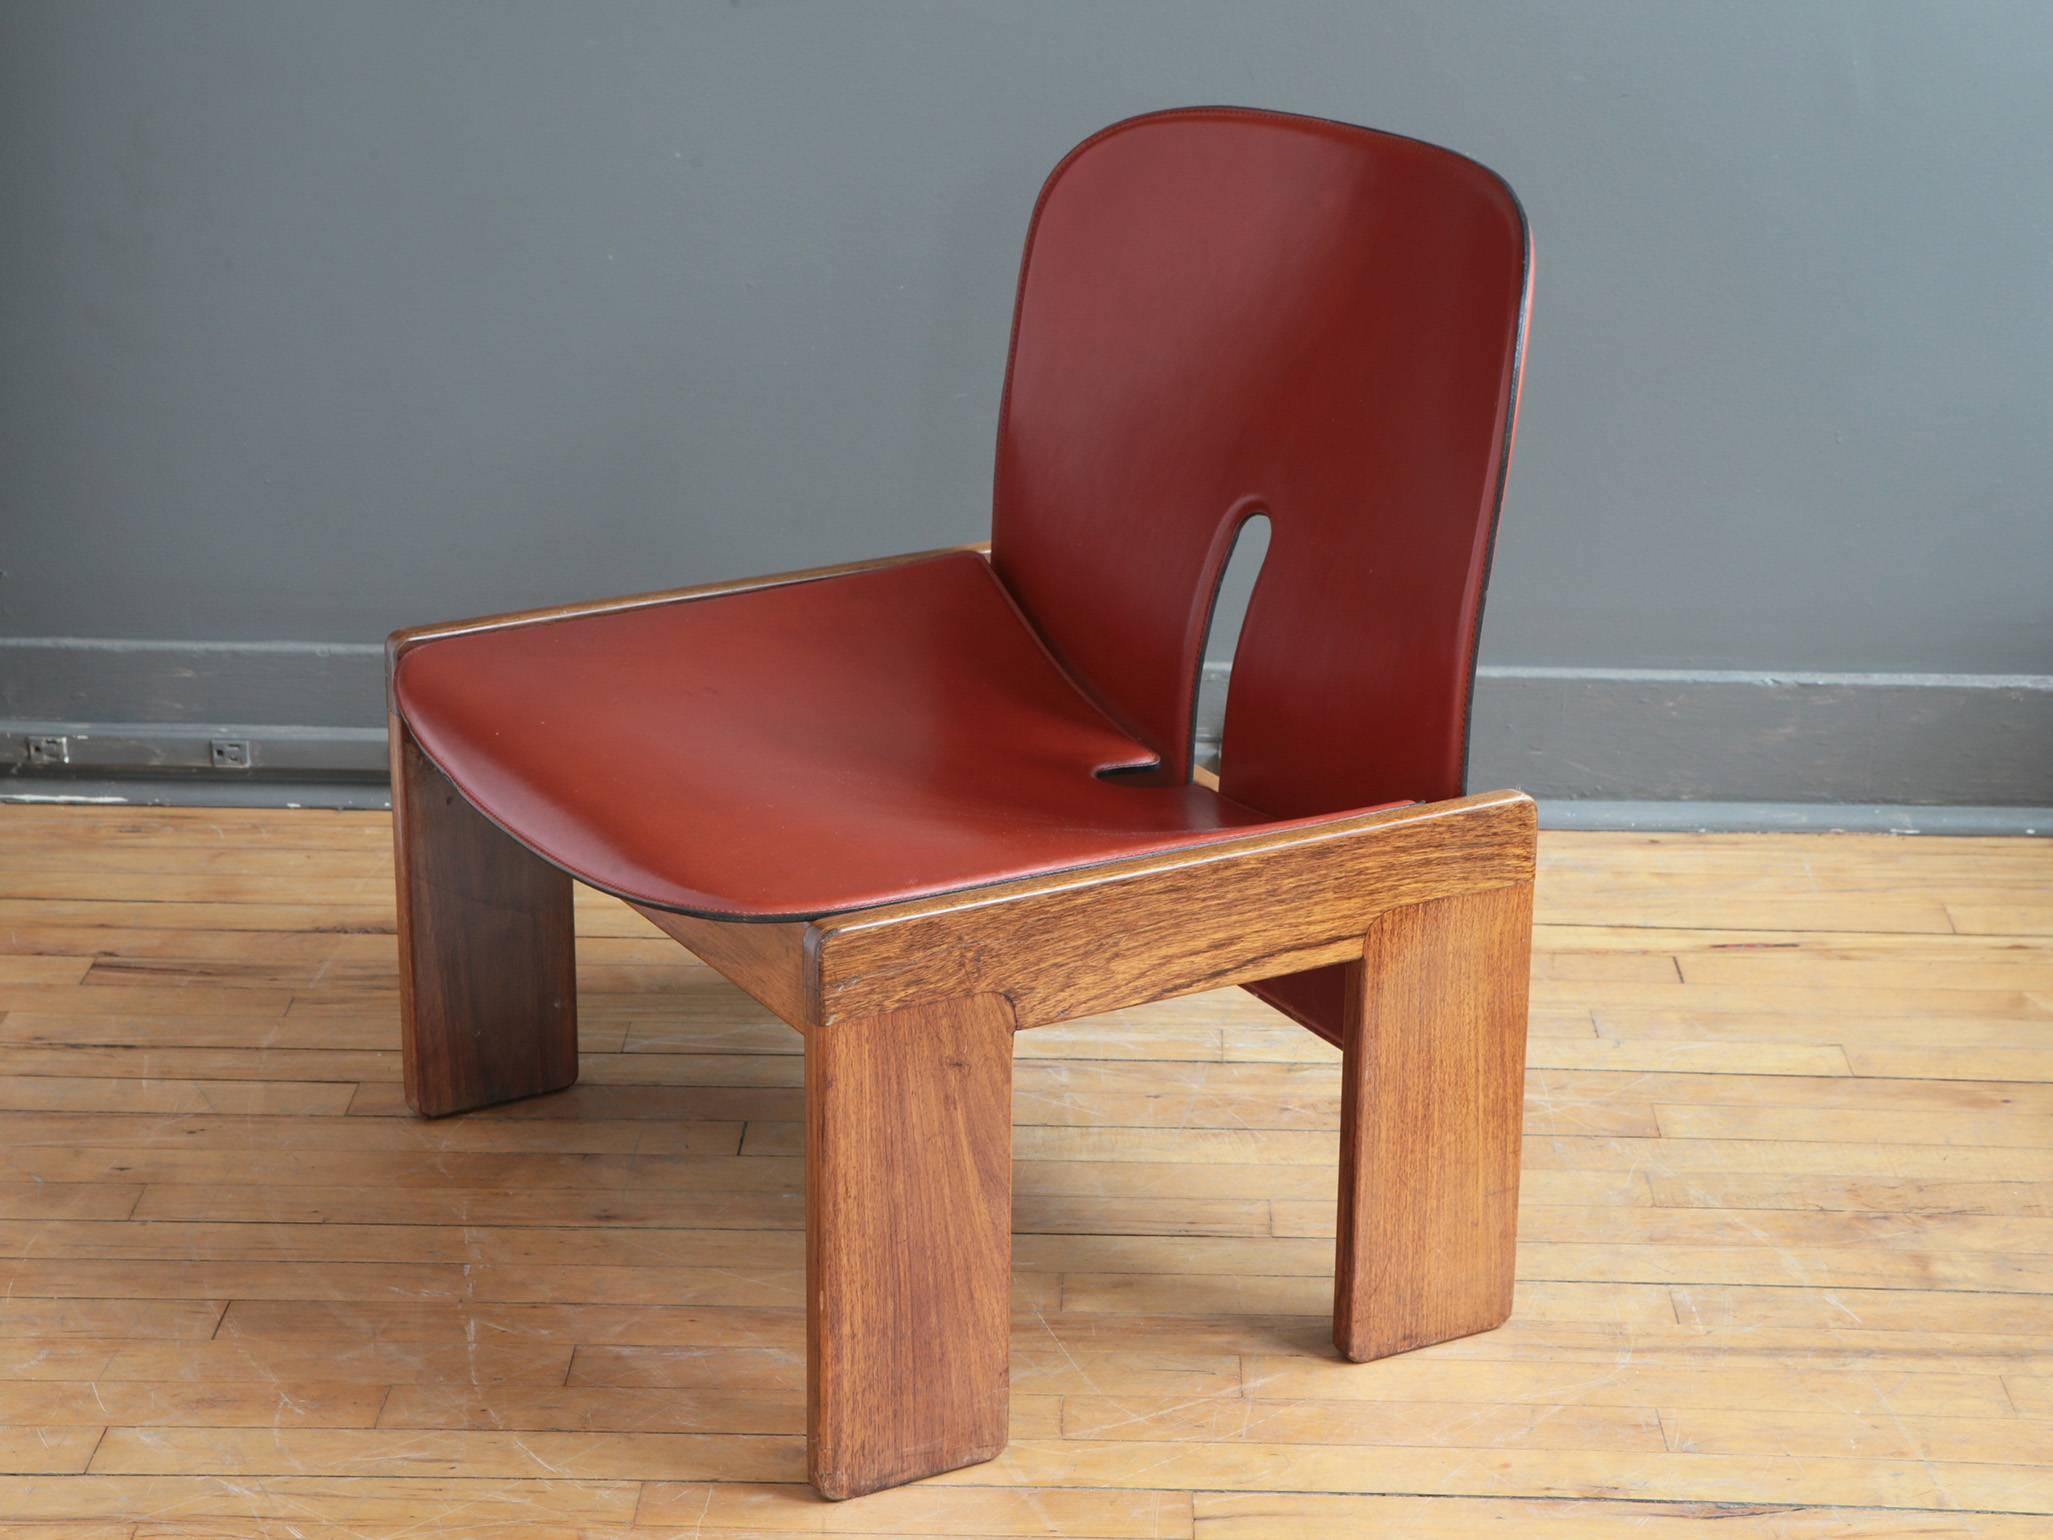 A model 925 lounge chair designed by Afra and Tobia Scarpa, circa 1966. Featuring a walnut frame with molded plywood seat and back covered in leather. Manufactured by Figli di Amedeo Cassina. Retains original label to underside.